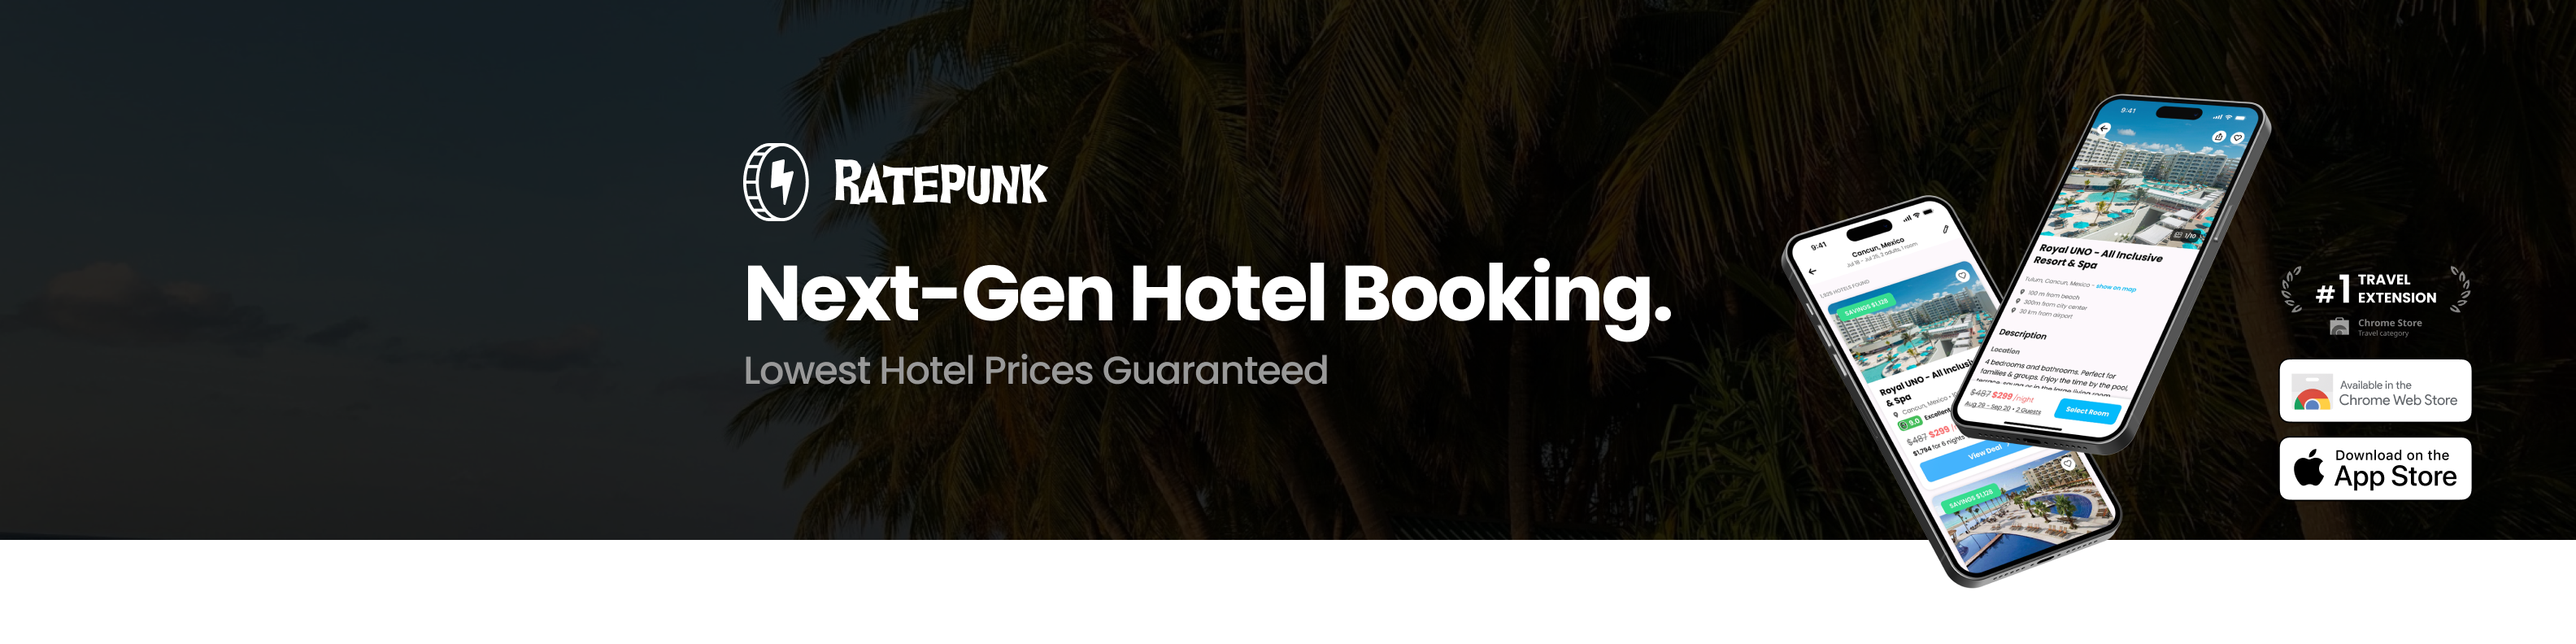 ratepunk - hotel booking helper for finding best prices